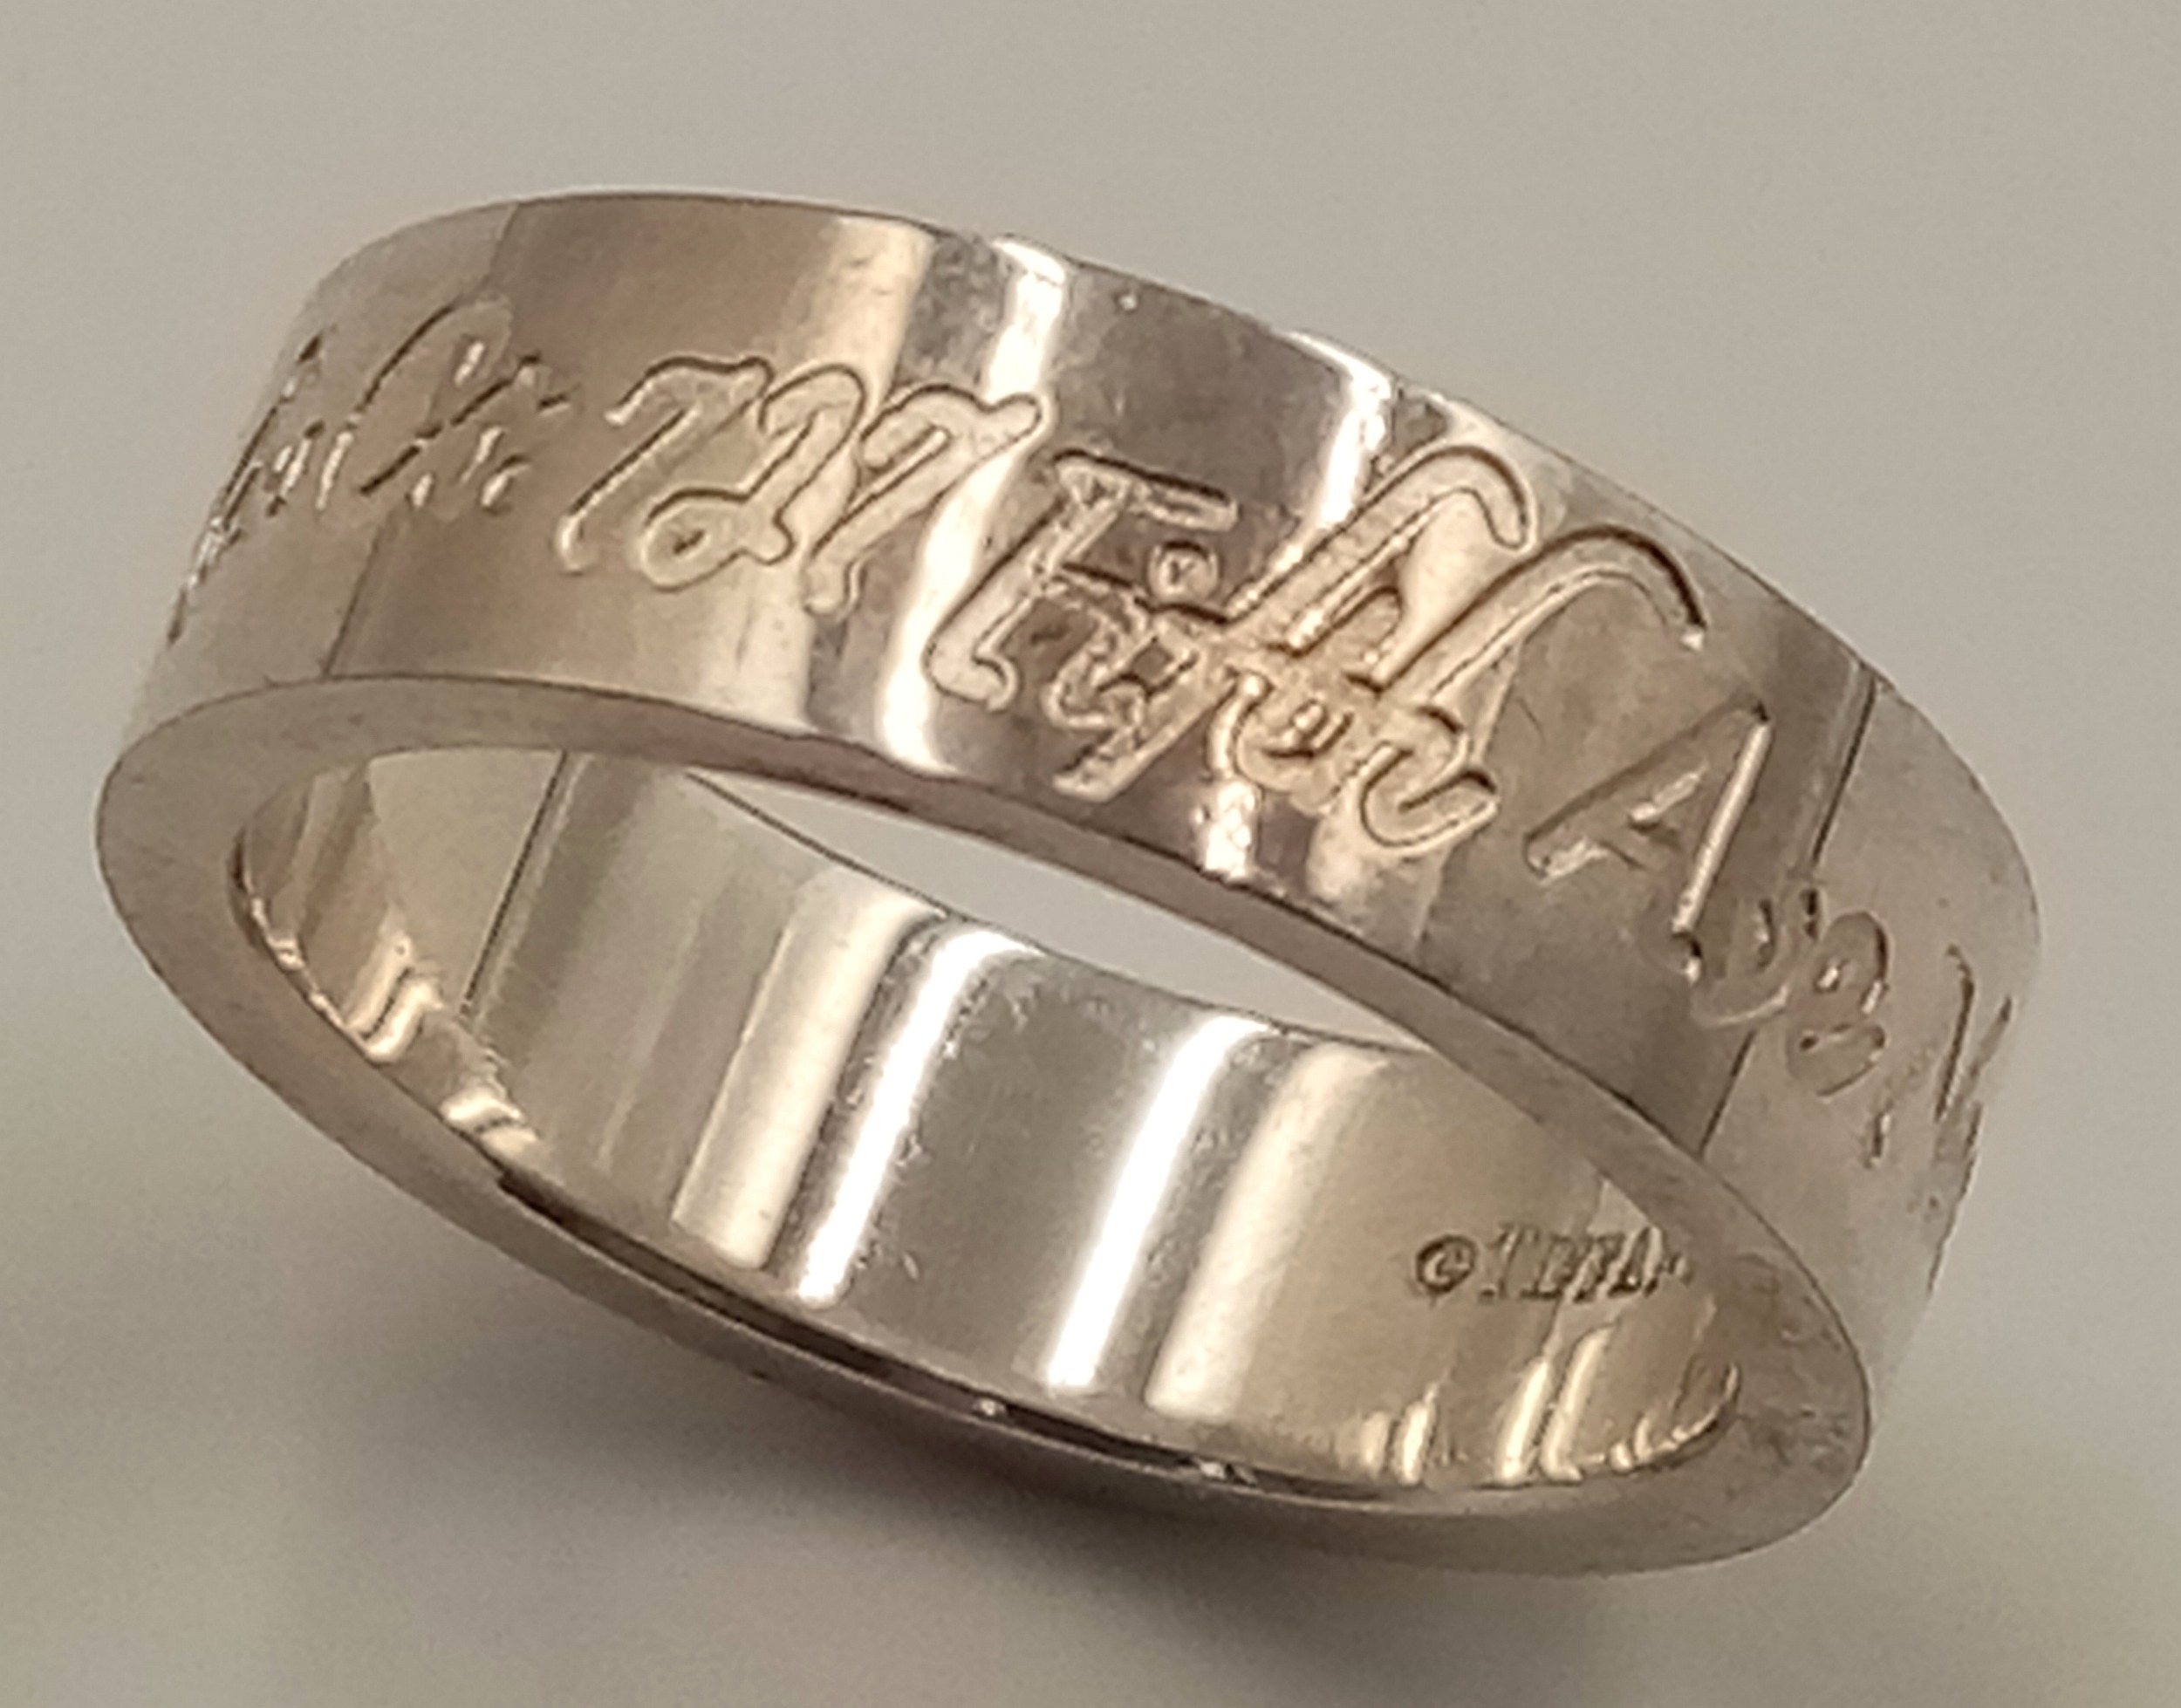 A TIFFANY & CO STERLING SILVER BAND RING, 727 NEW YORK FIFTH AVENUE. Size N, 5g total weight. Ref: - Image 4 of 5